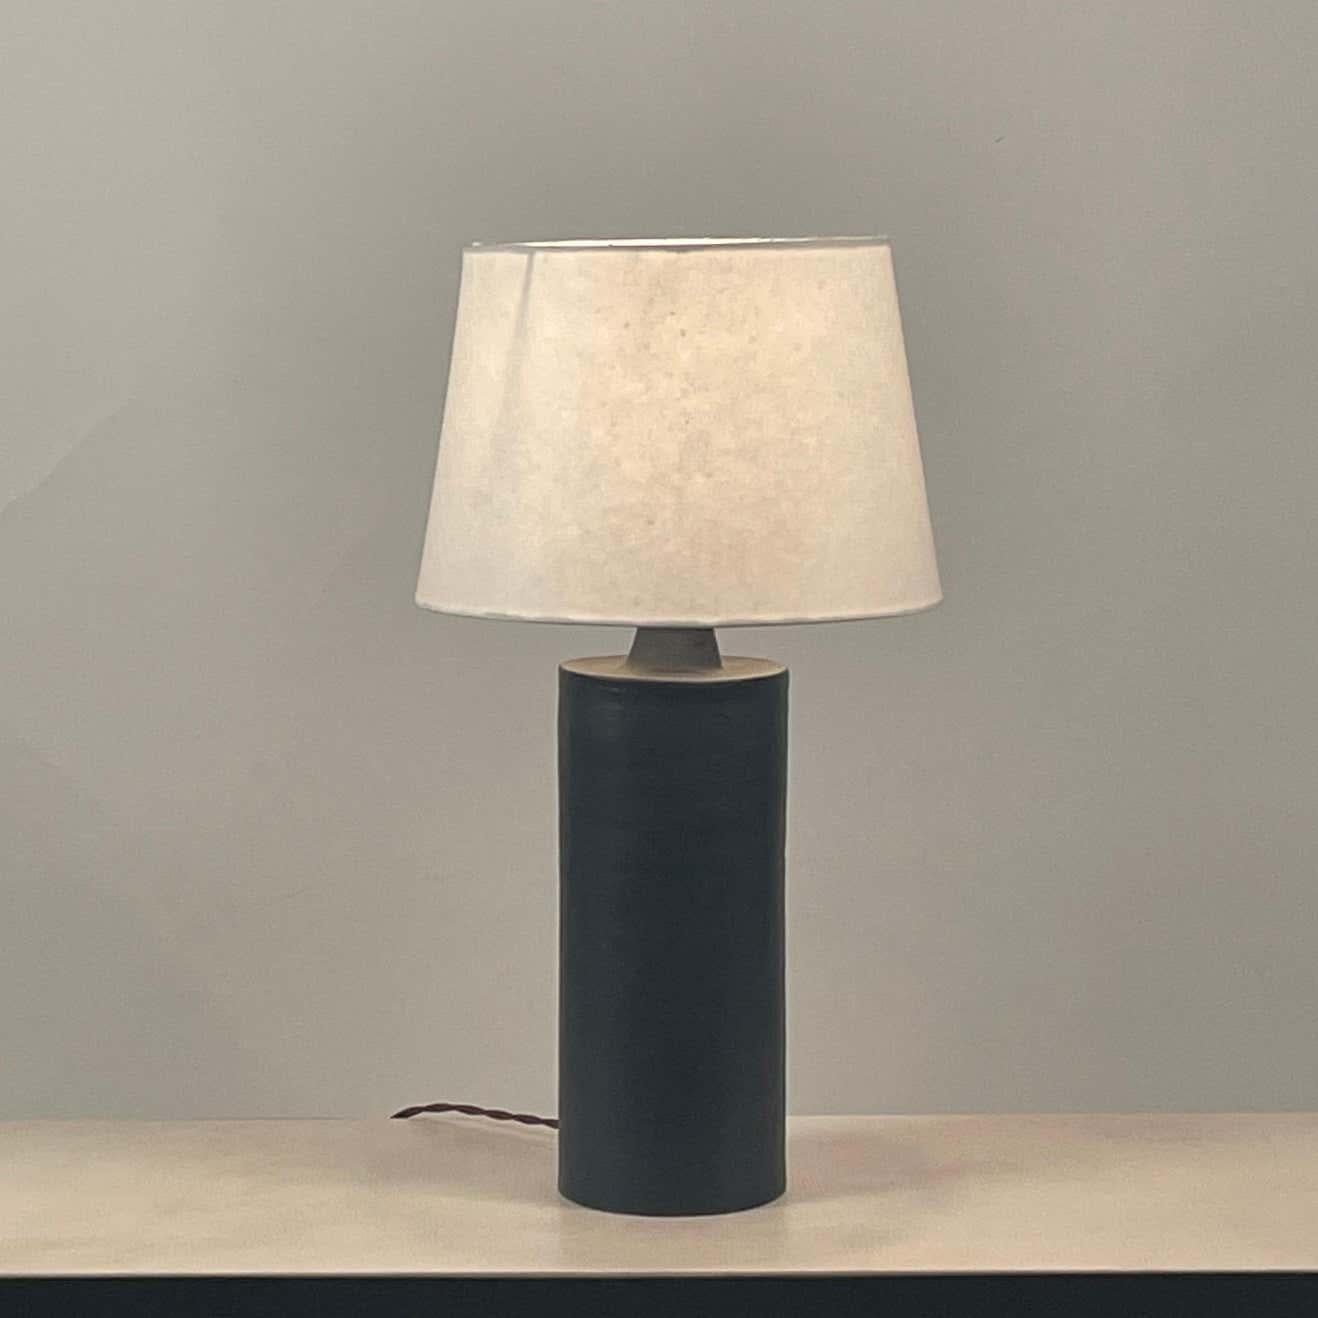 Perfect where a smaller, understated lamp is desired. Dimensions listed are the overall dimensions of the lamp with the shade.

The shade is 10 in. bottom diameter x 8 in. top diameter x 7 in. tall.